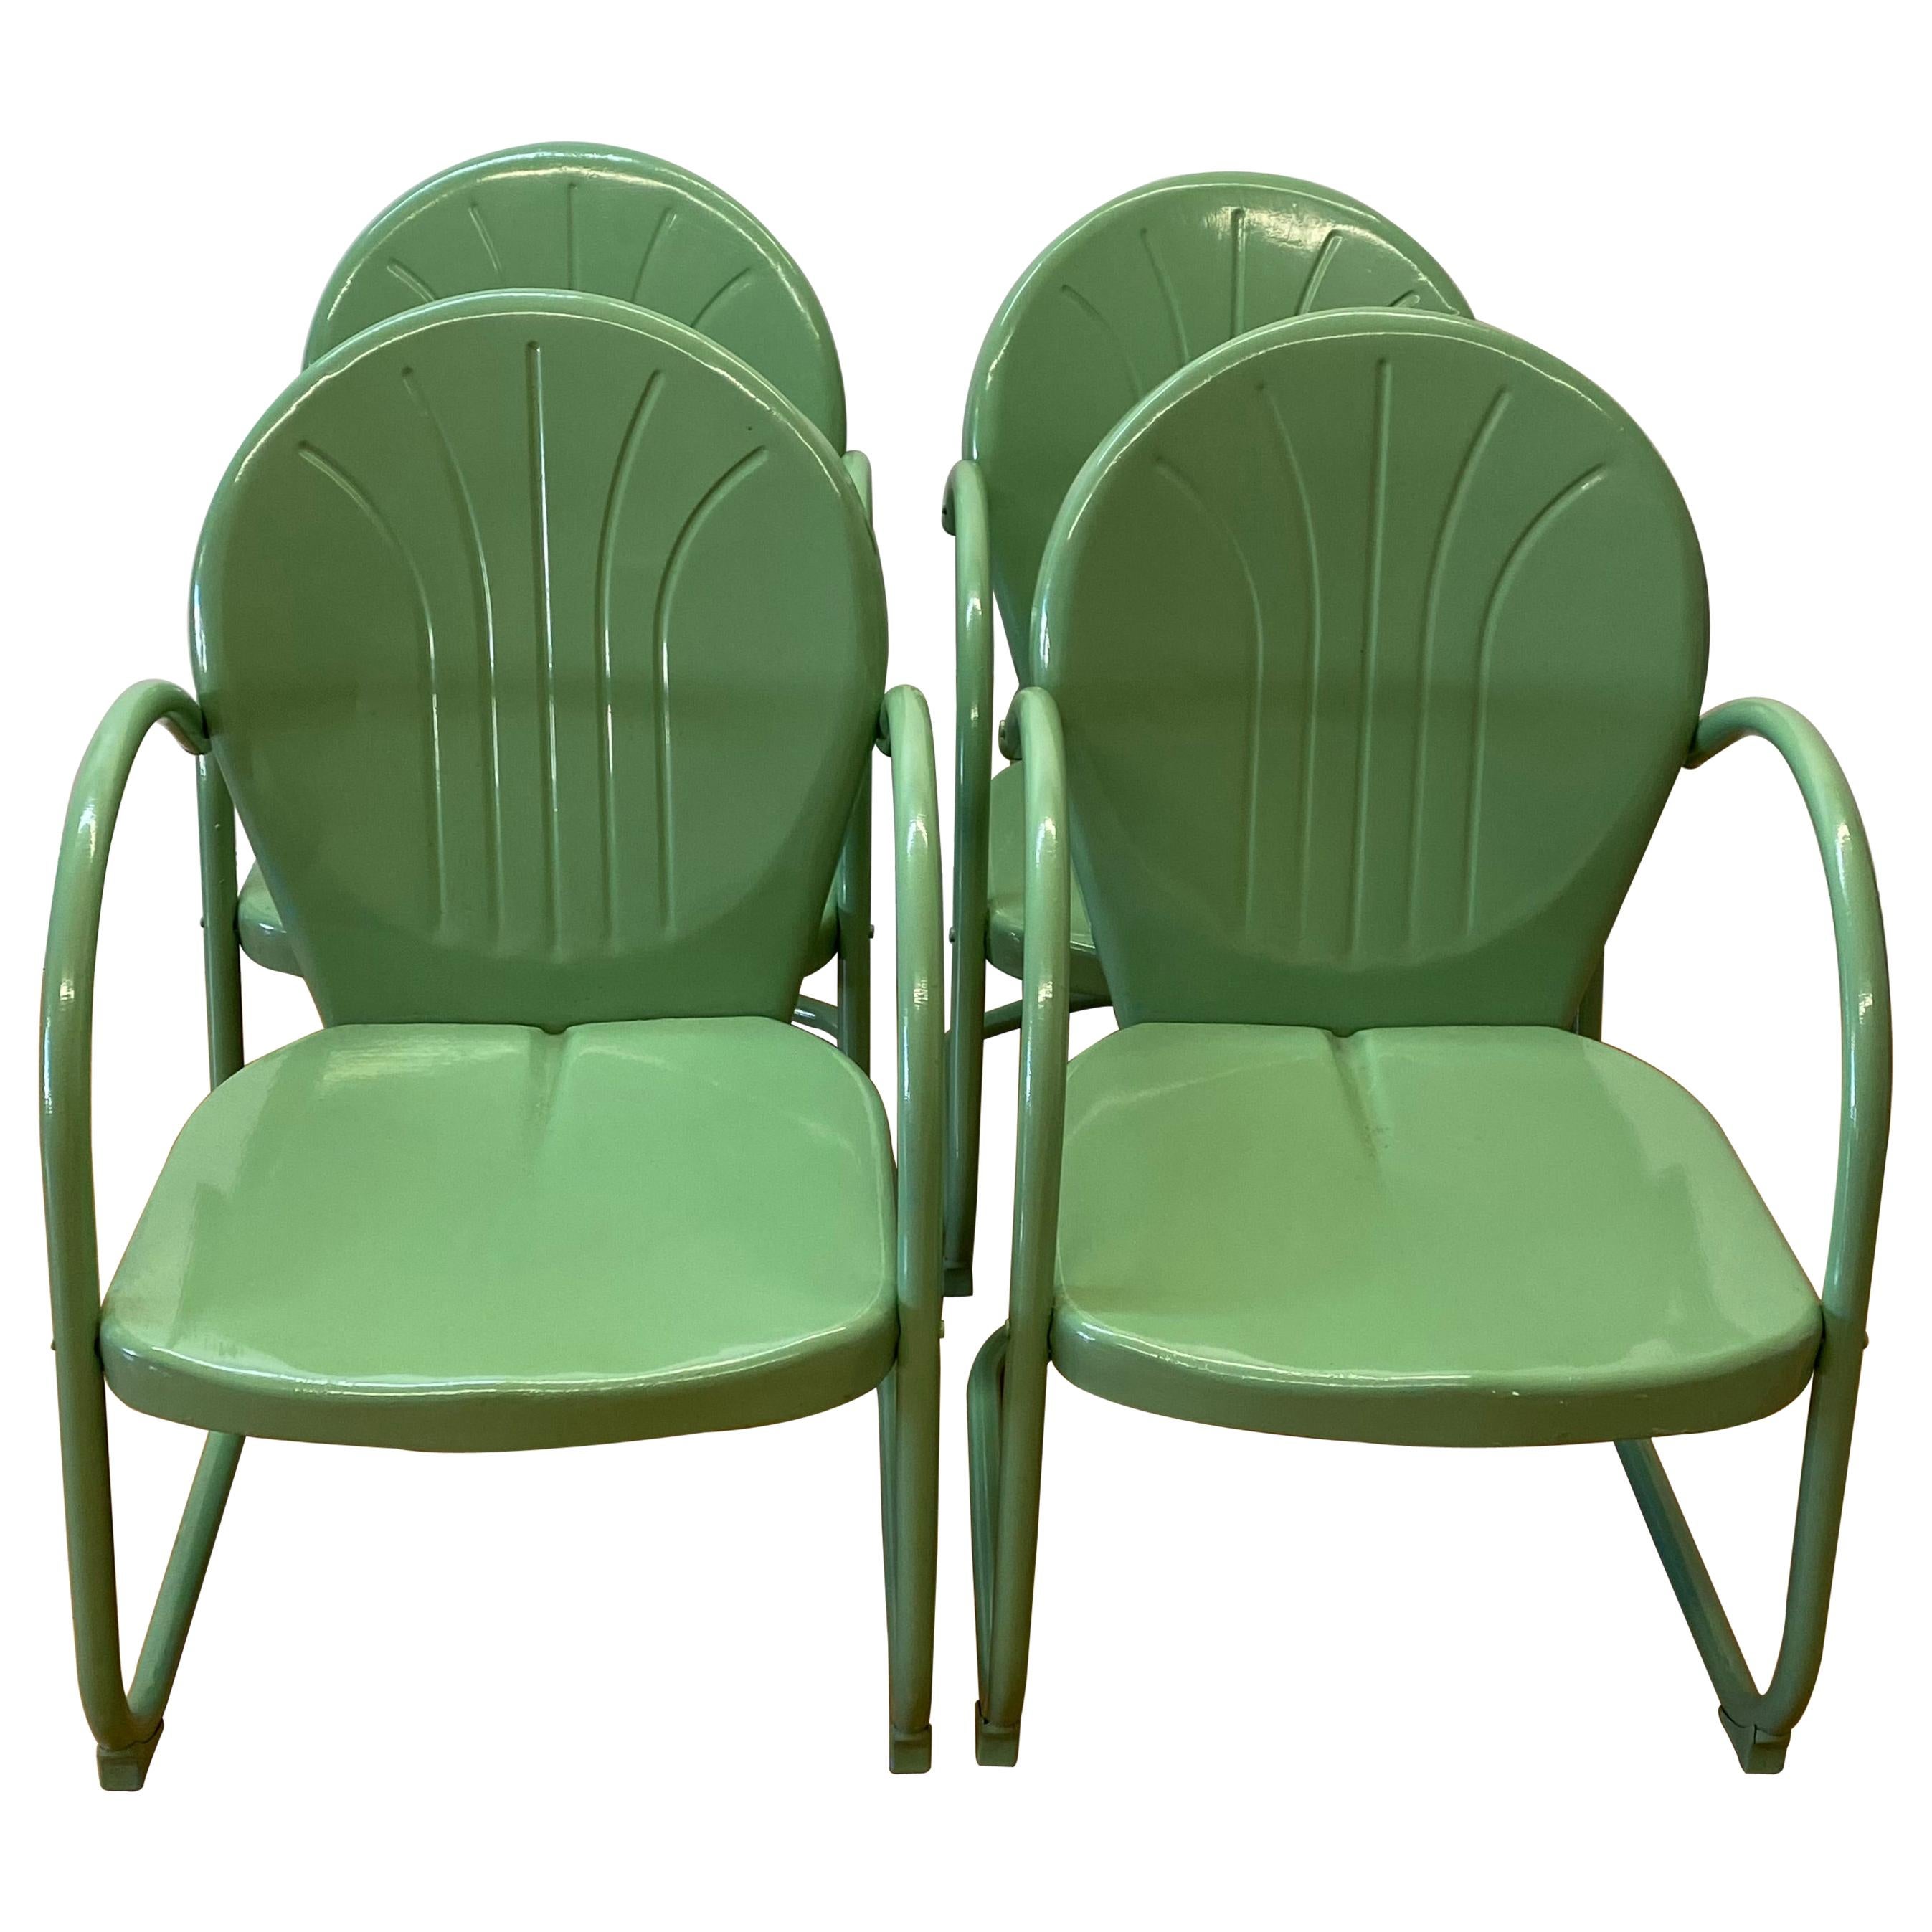 Set of Four Vintage Mint Green Enameled Metal Patio Garden Chairs, C.1940s